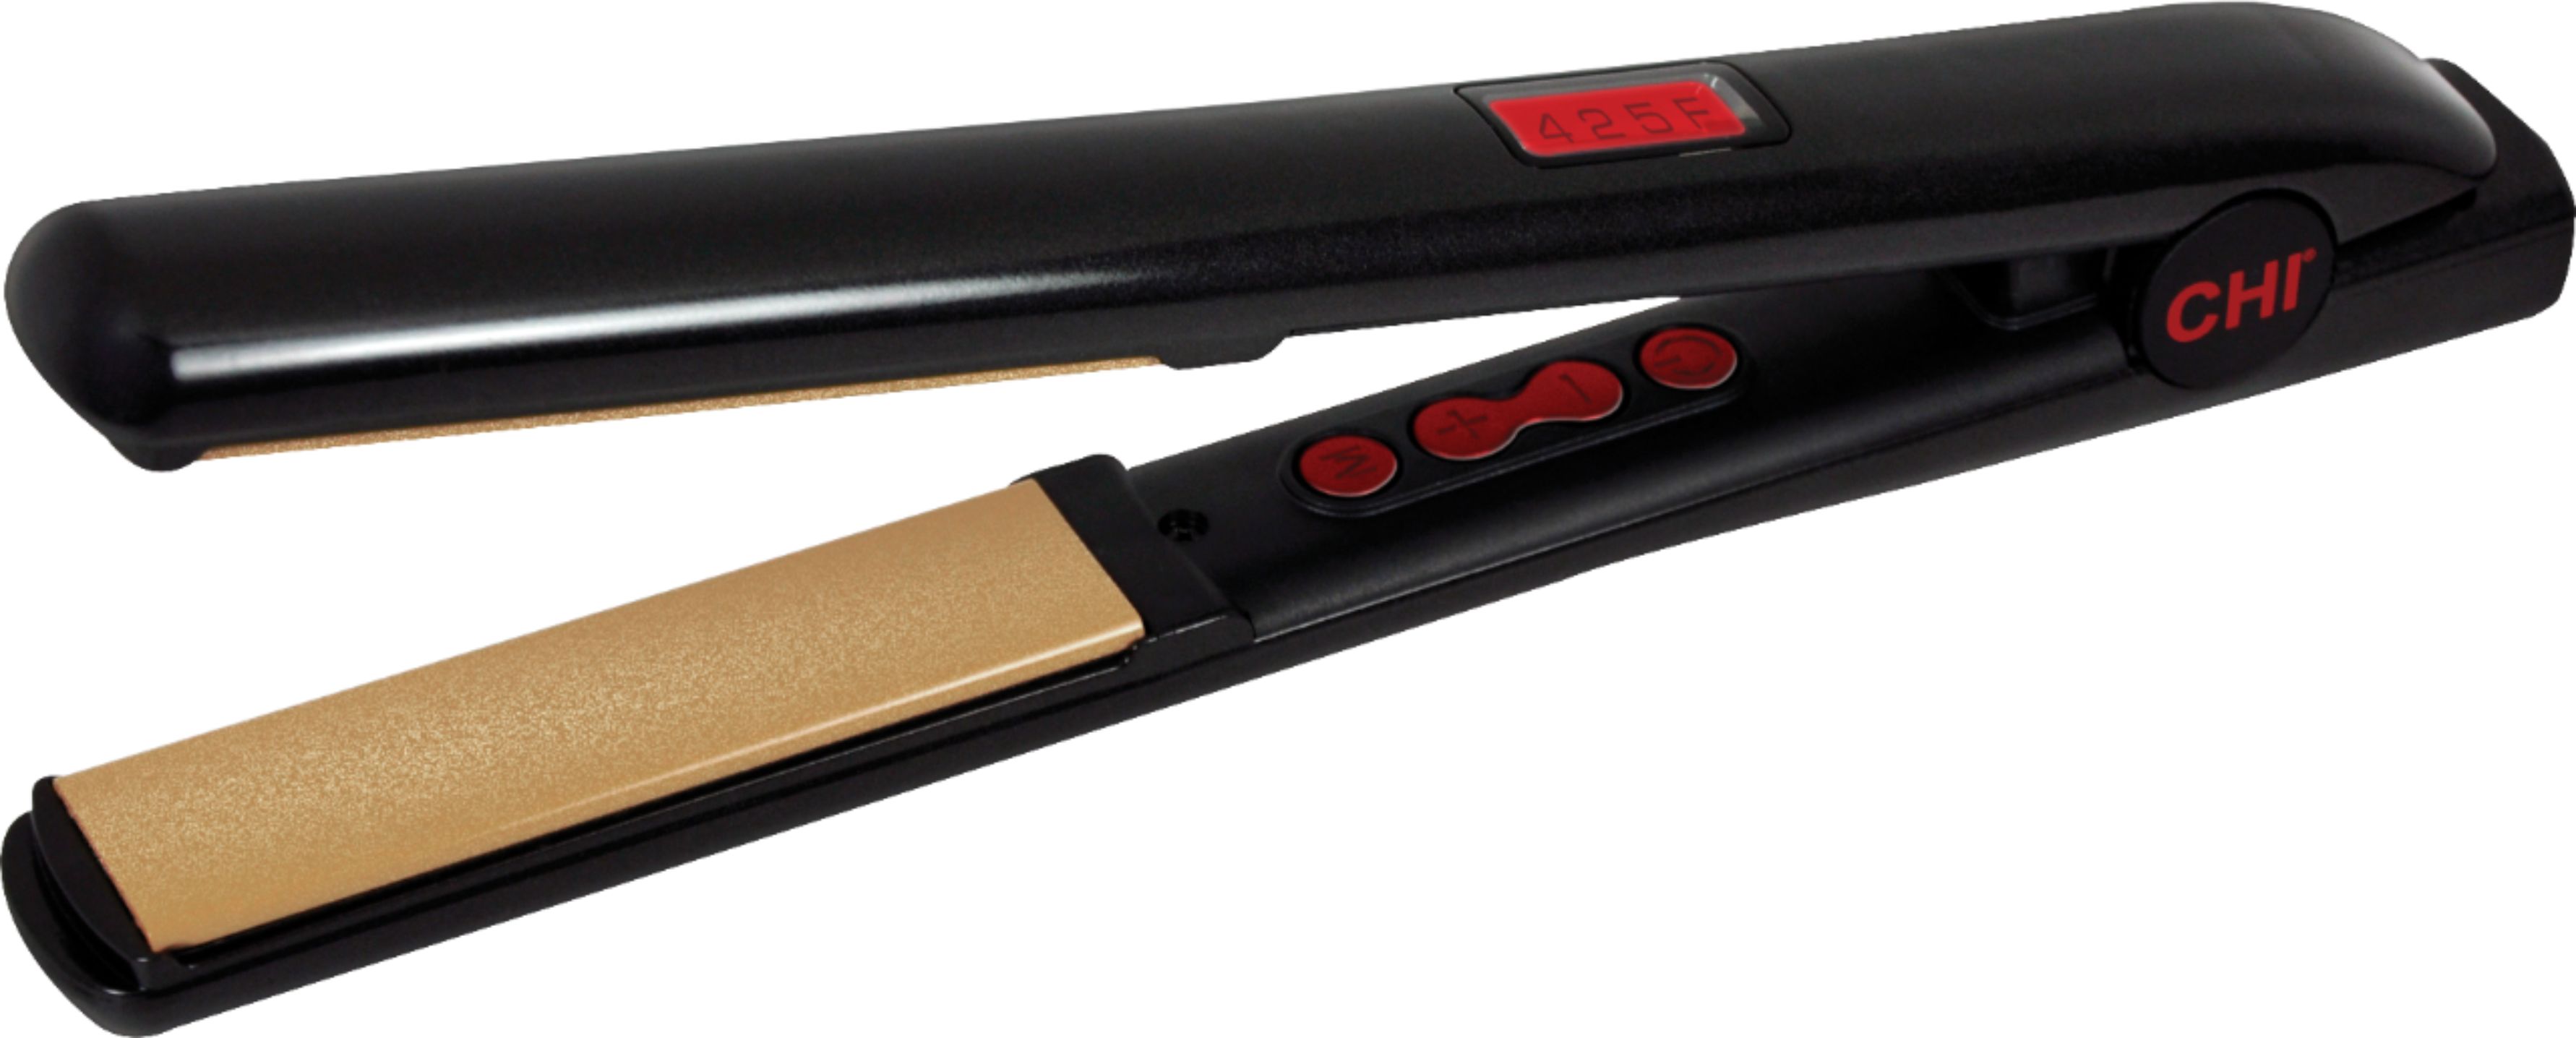 Angle View: CHI - G2 Hair Styler - Black/Brown